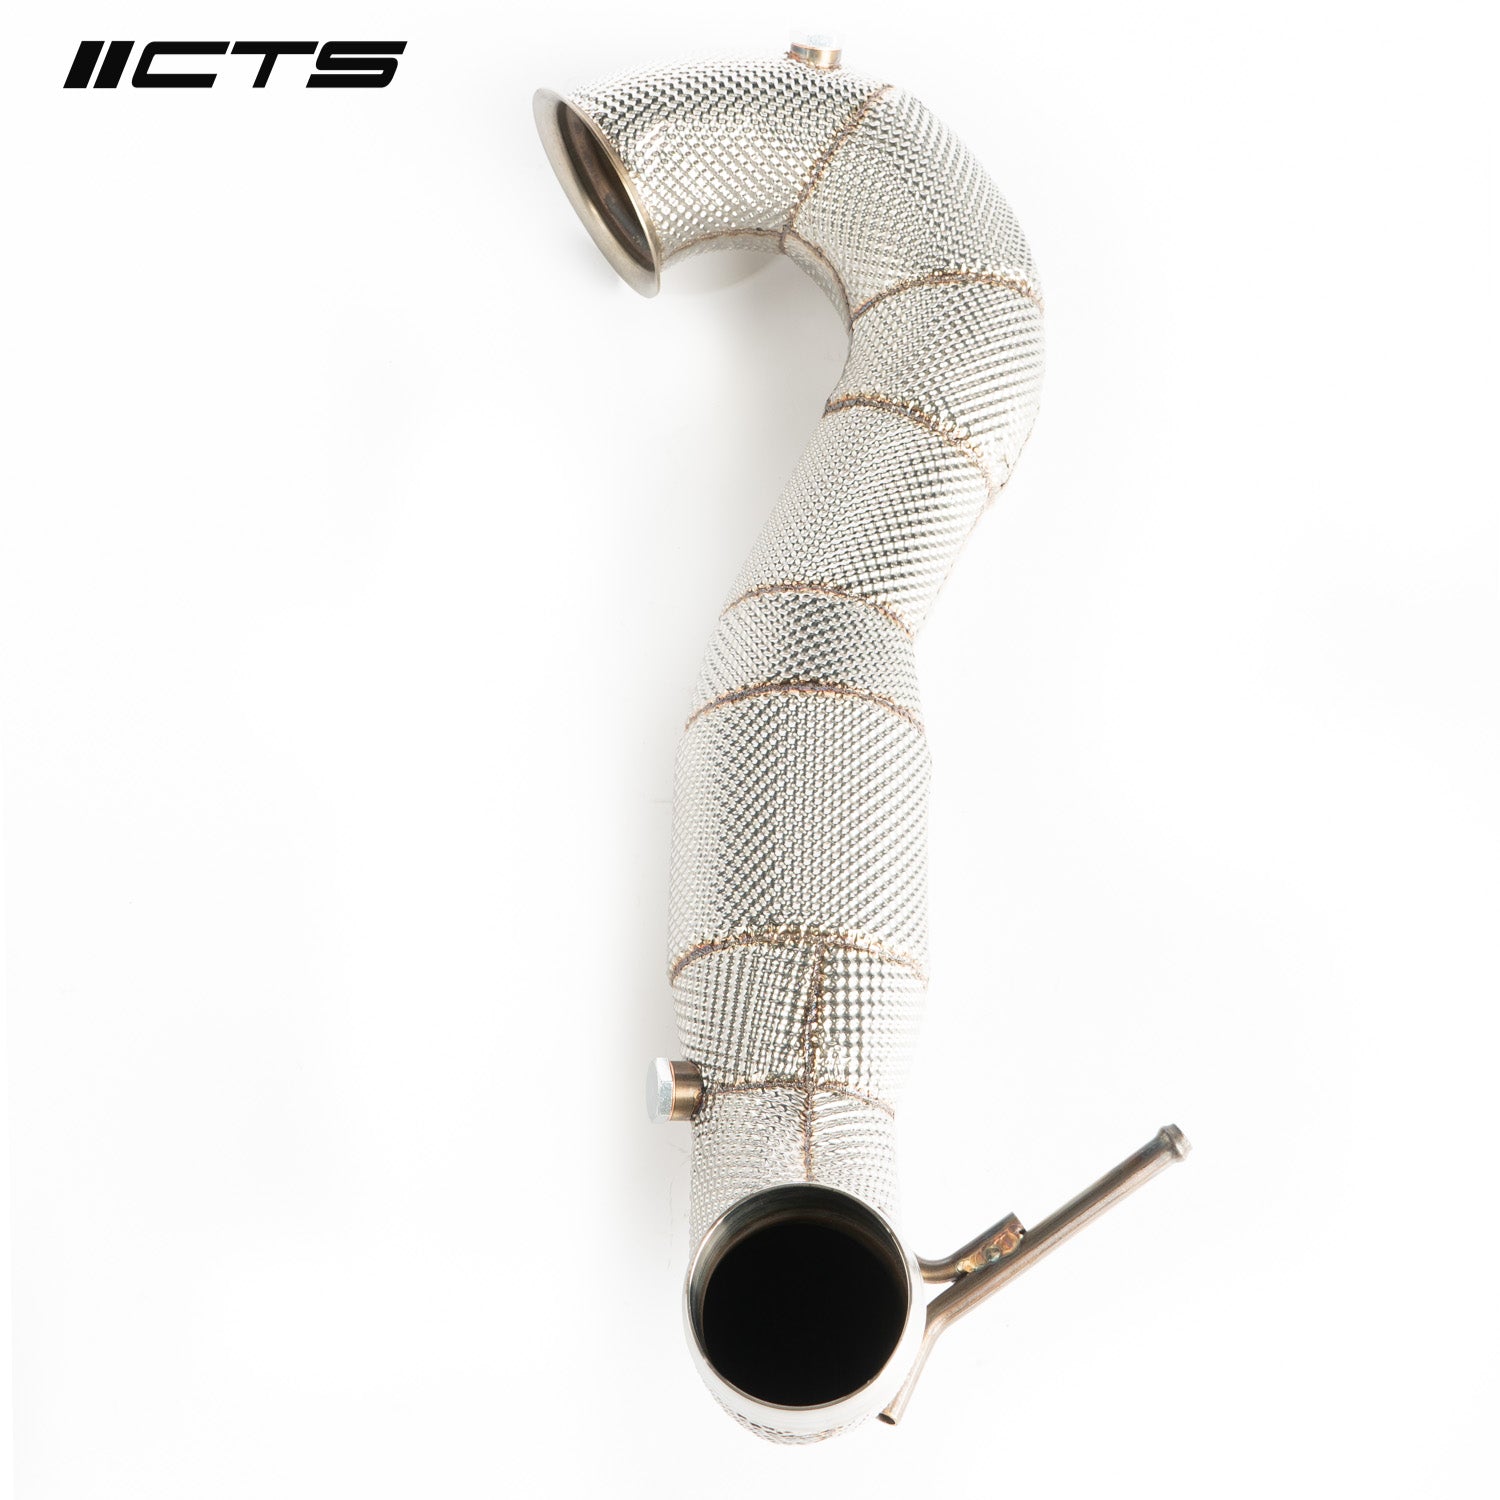 CTS TURBO MERCEDES-BENZ M133 A45/CLA45/GLA45 AMG DOWNPIPE HIGH-FLOW CAT